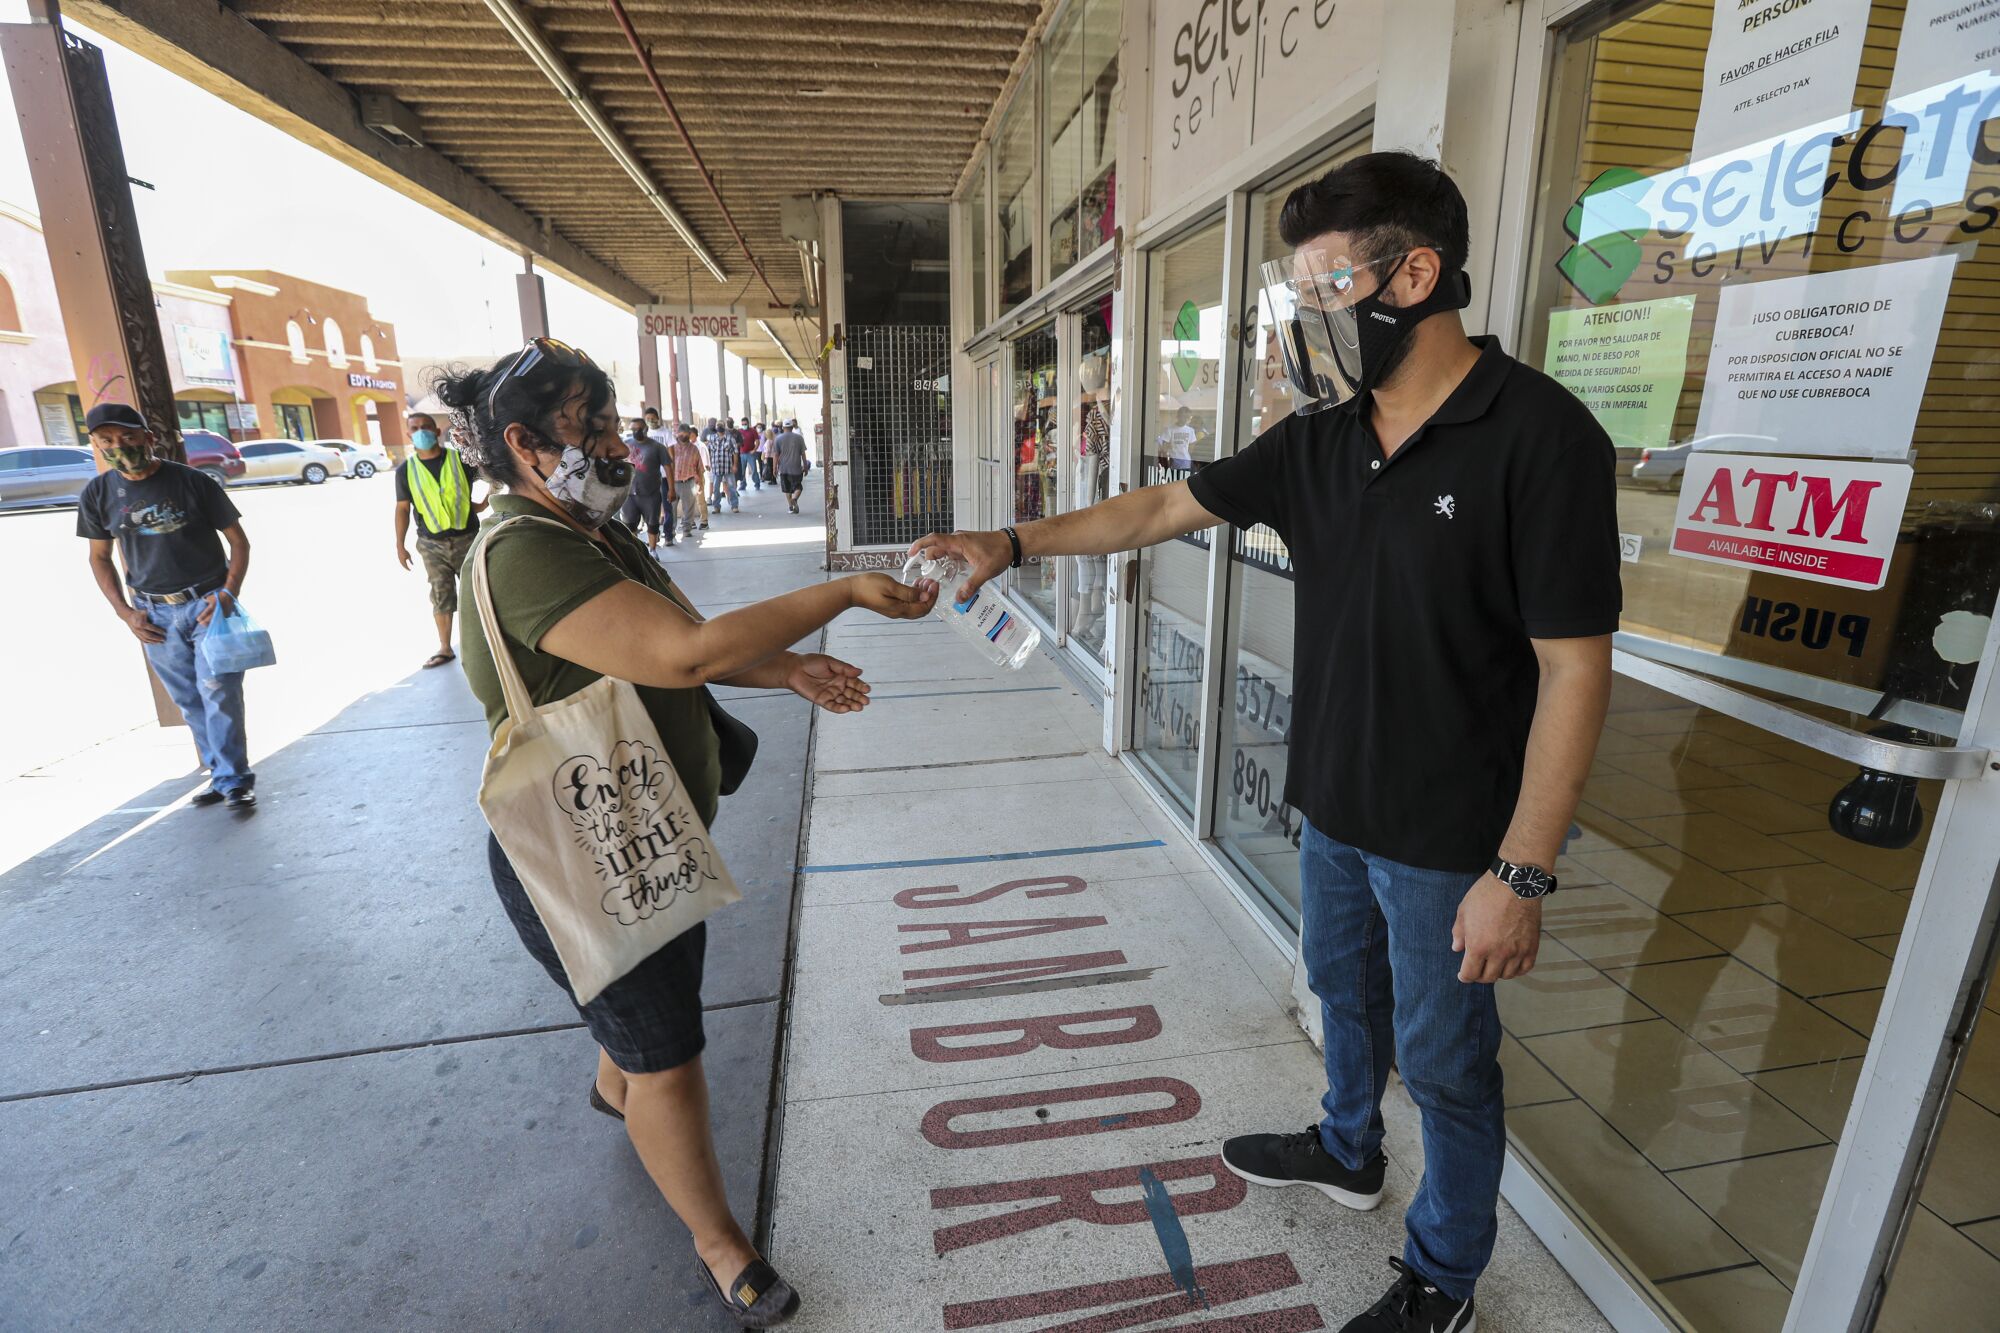 Emmanuel Vazquez squirts hand sanitizer into a woman's hand outside a private service agency in Calexico.